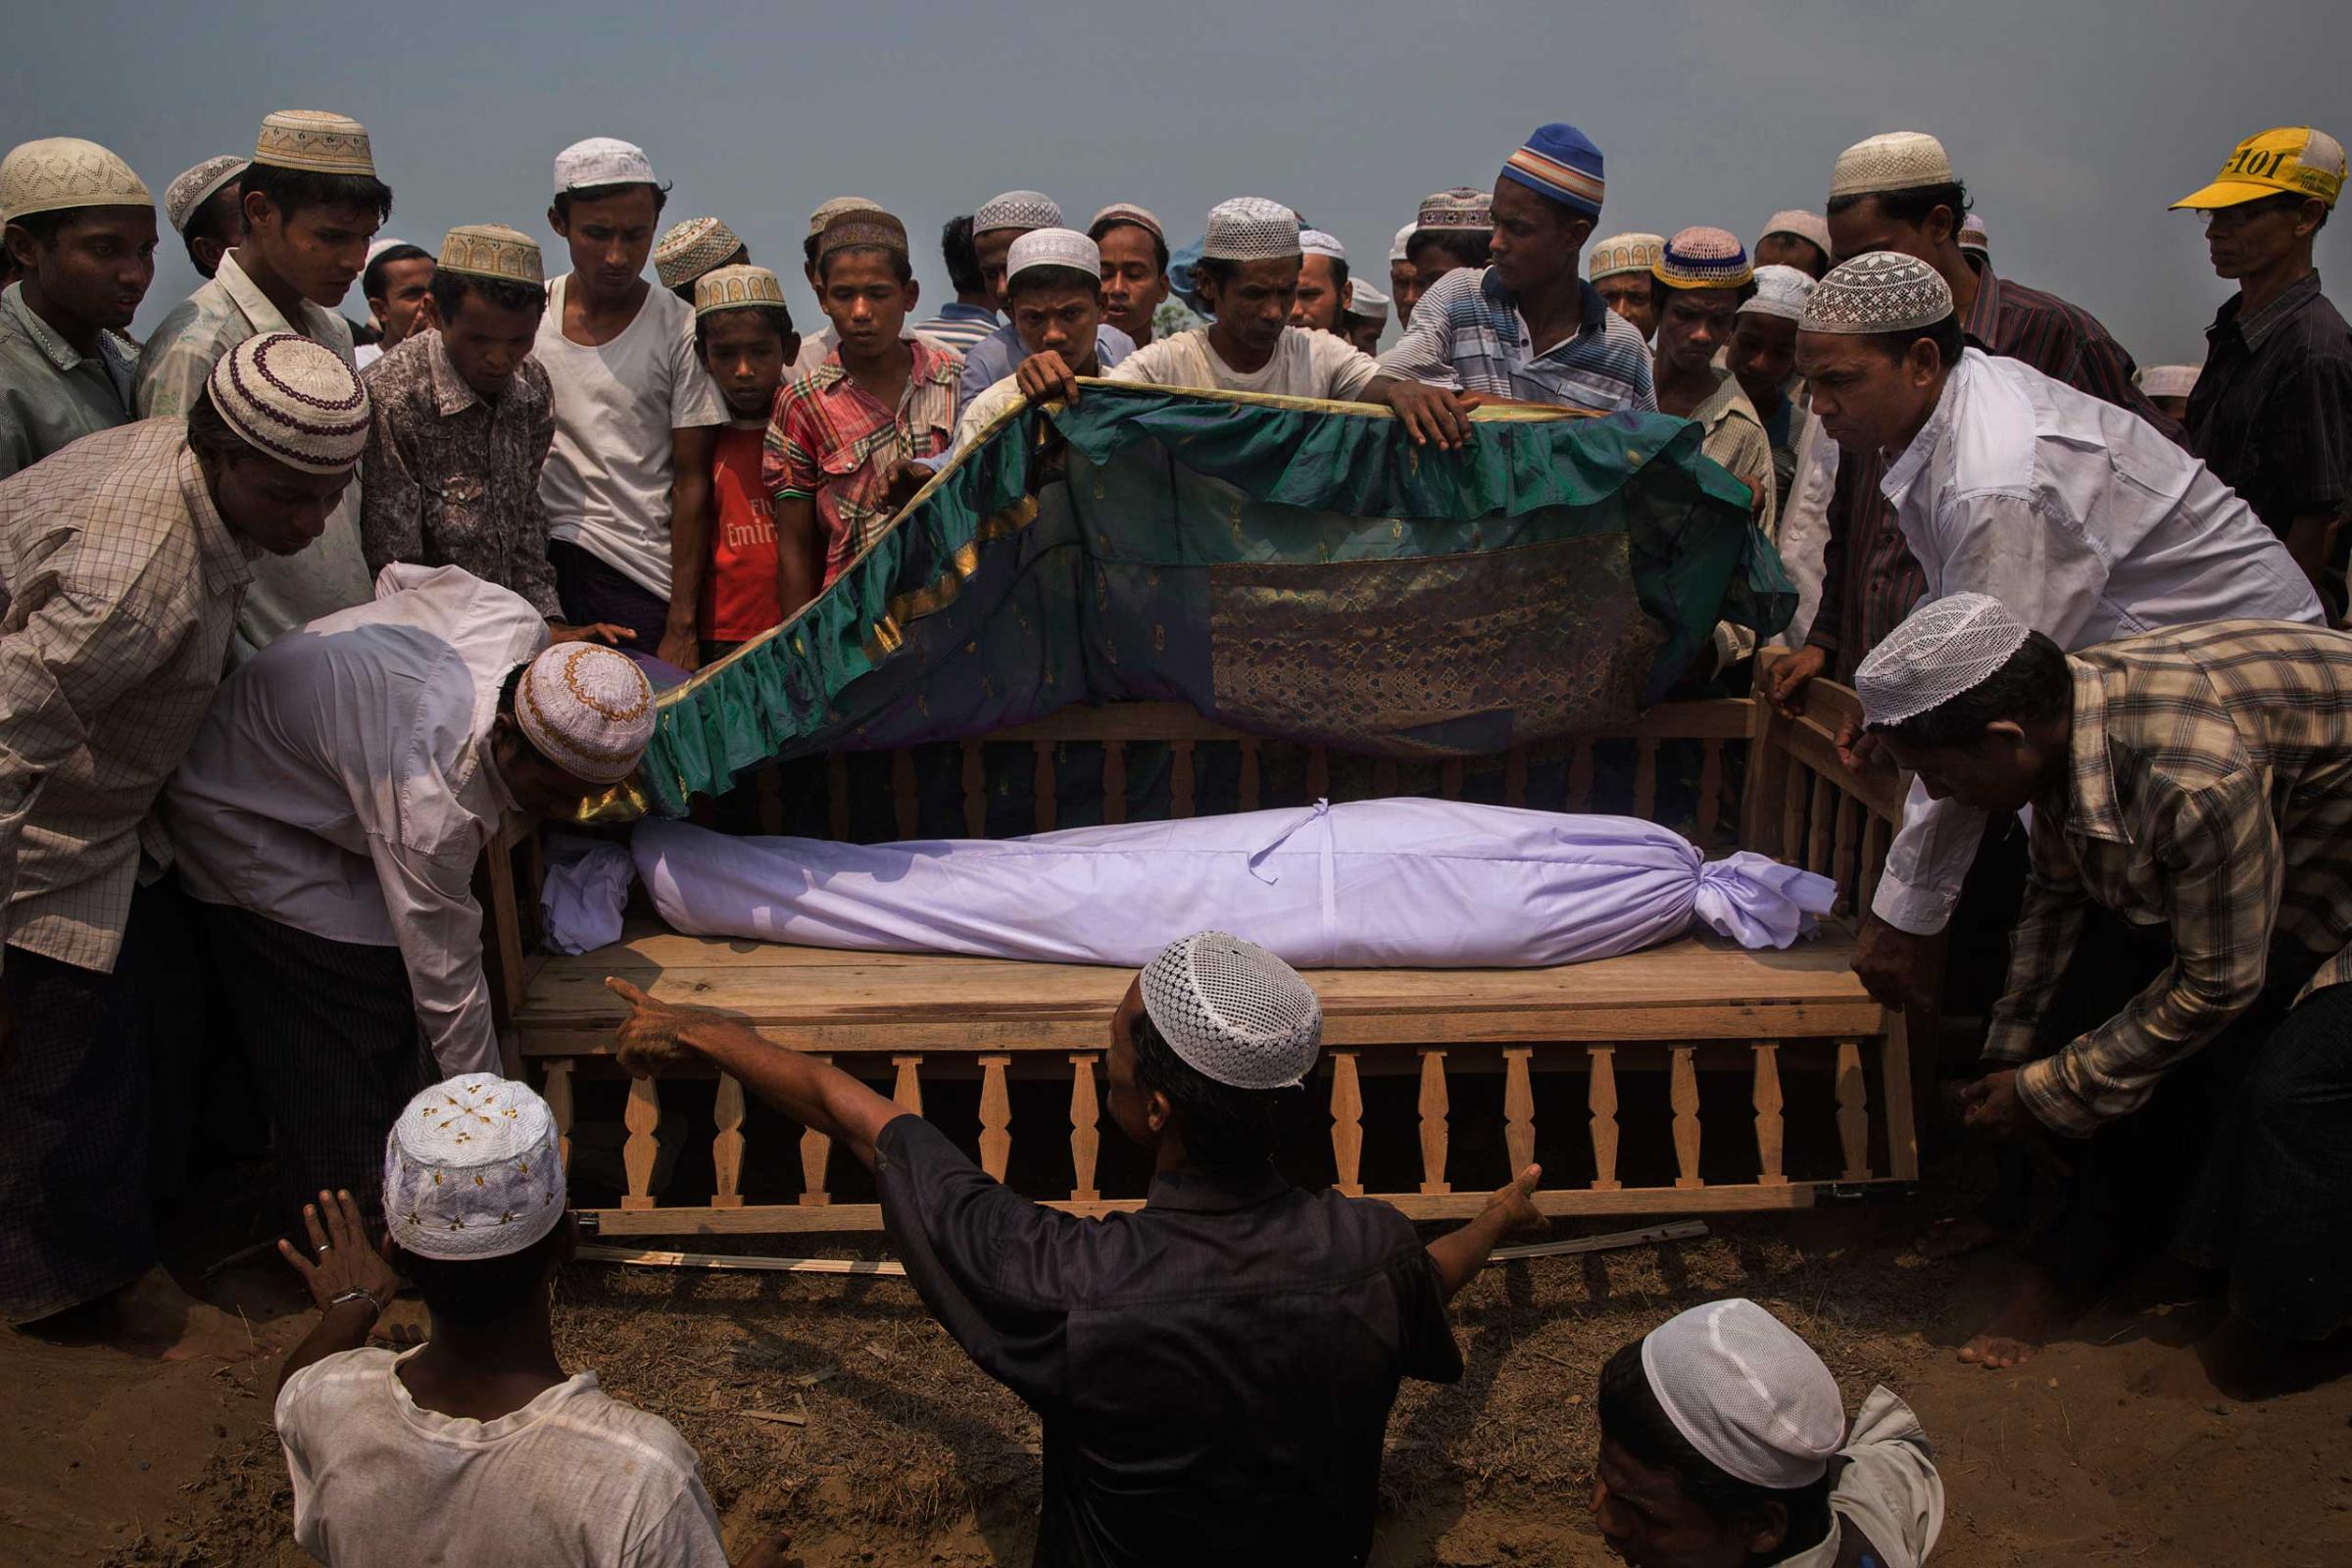 The body of Nur Husain, who died after suffering from a respiratory condition, is buried near his home in a camp near Sittwe, Myanmar. The Rohingya are a Muslim minority persecuted by Myanmar's Buddhist-led government.